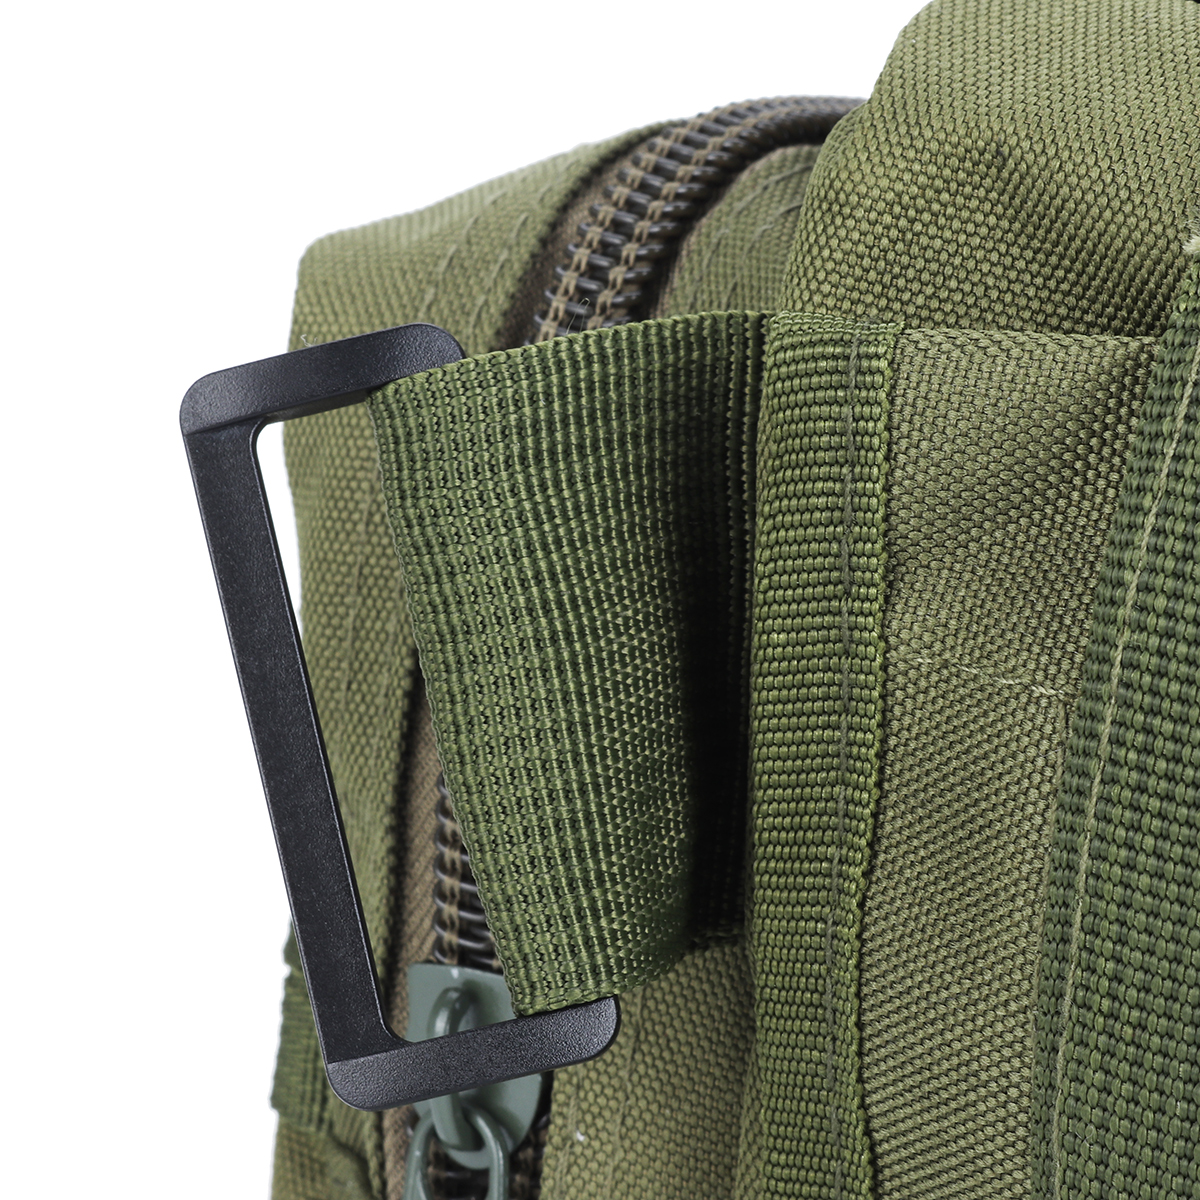 Multifunctional-Outdoor-Sports-Hiking-with-Zippers-Nylon-Oxford-Cloth-Tactical-Shoulder-Bag-Waist-Pa-1825563-19